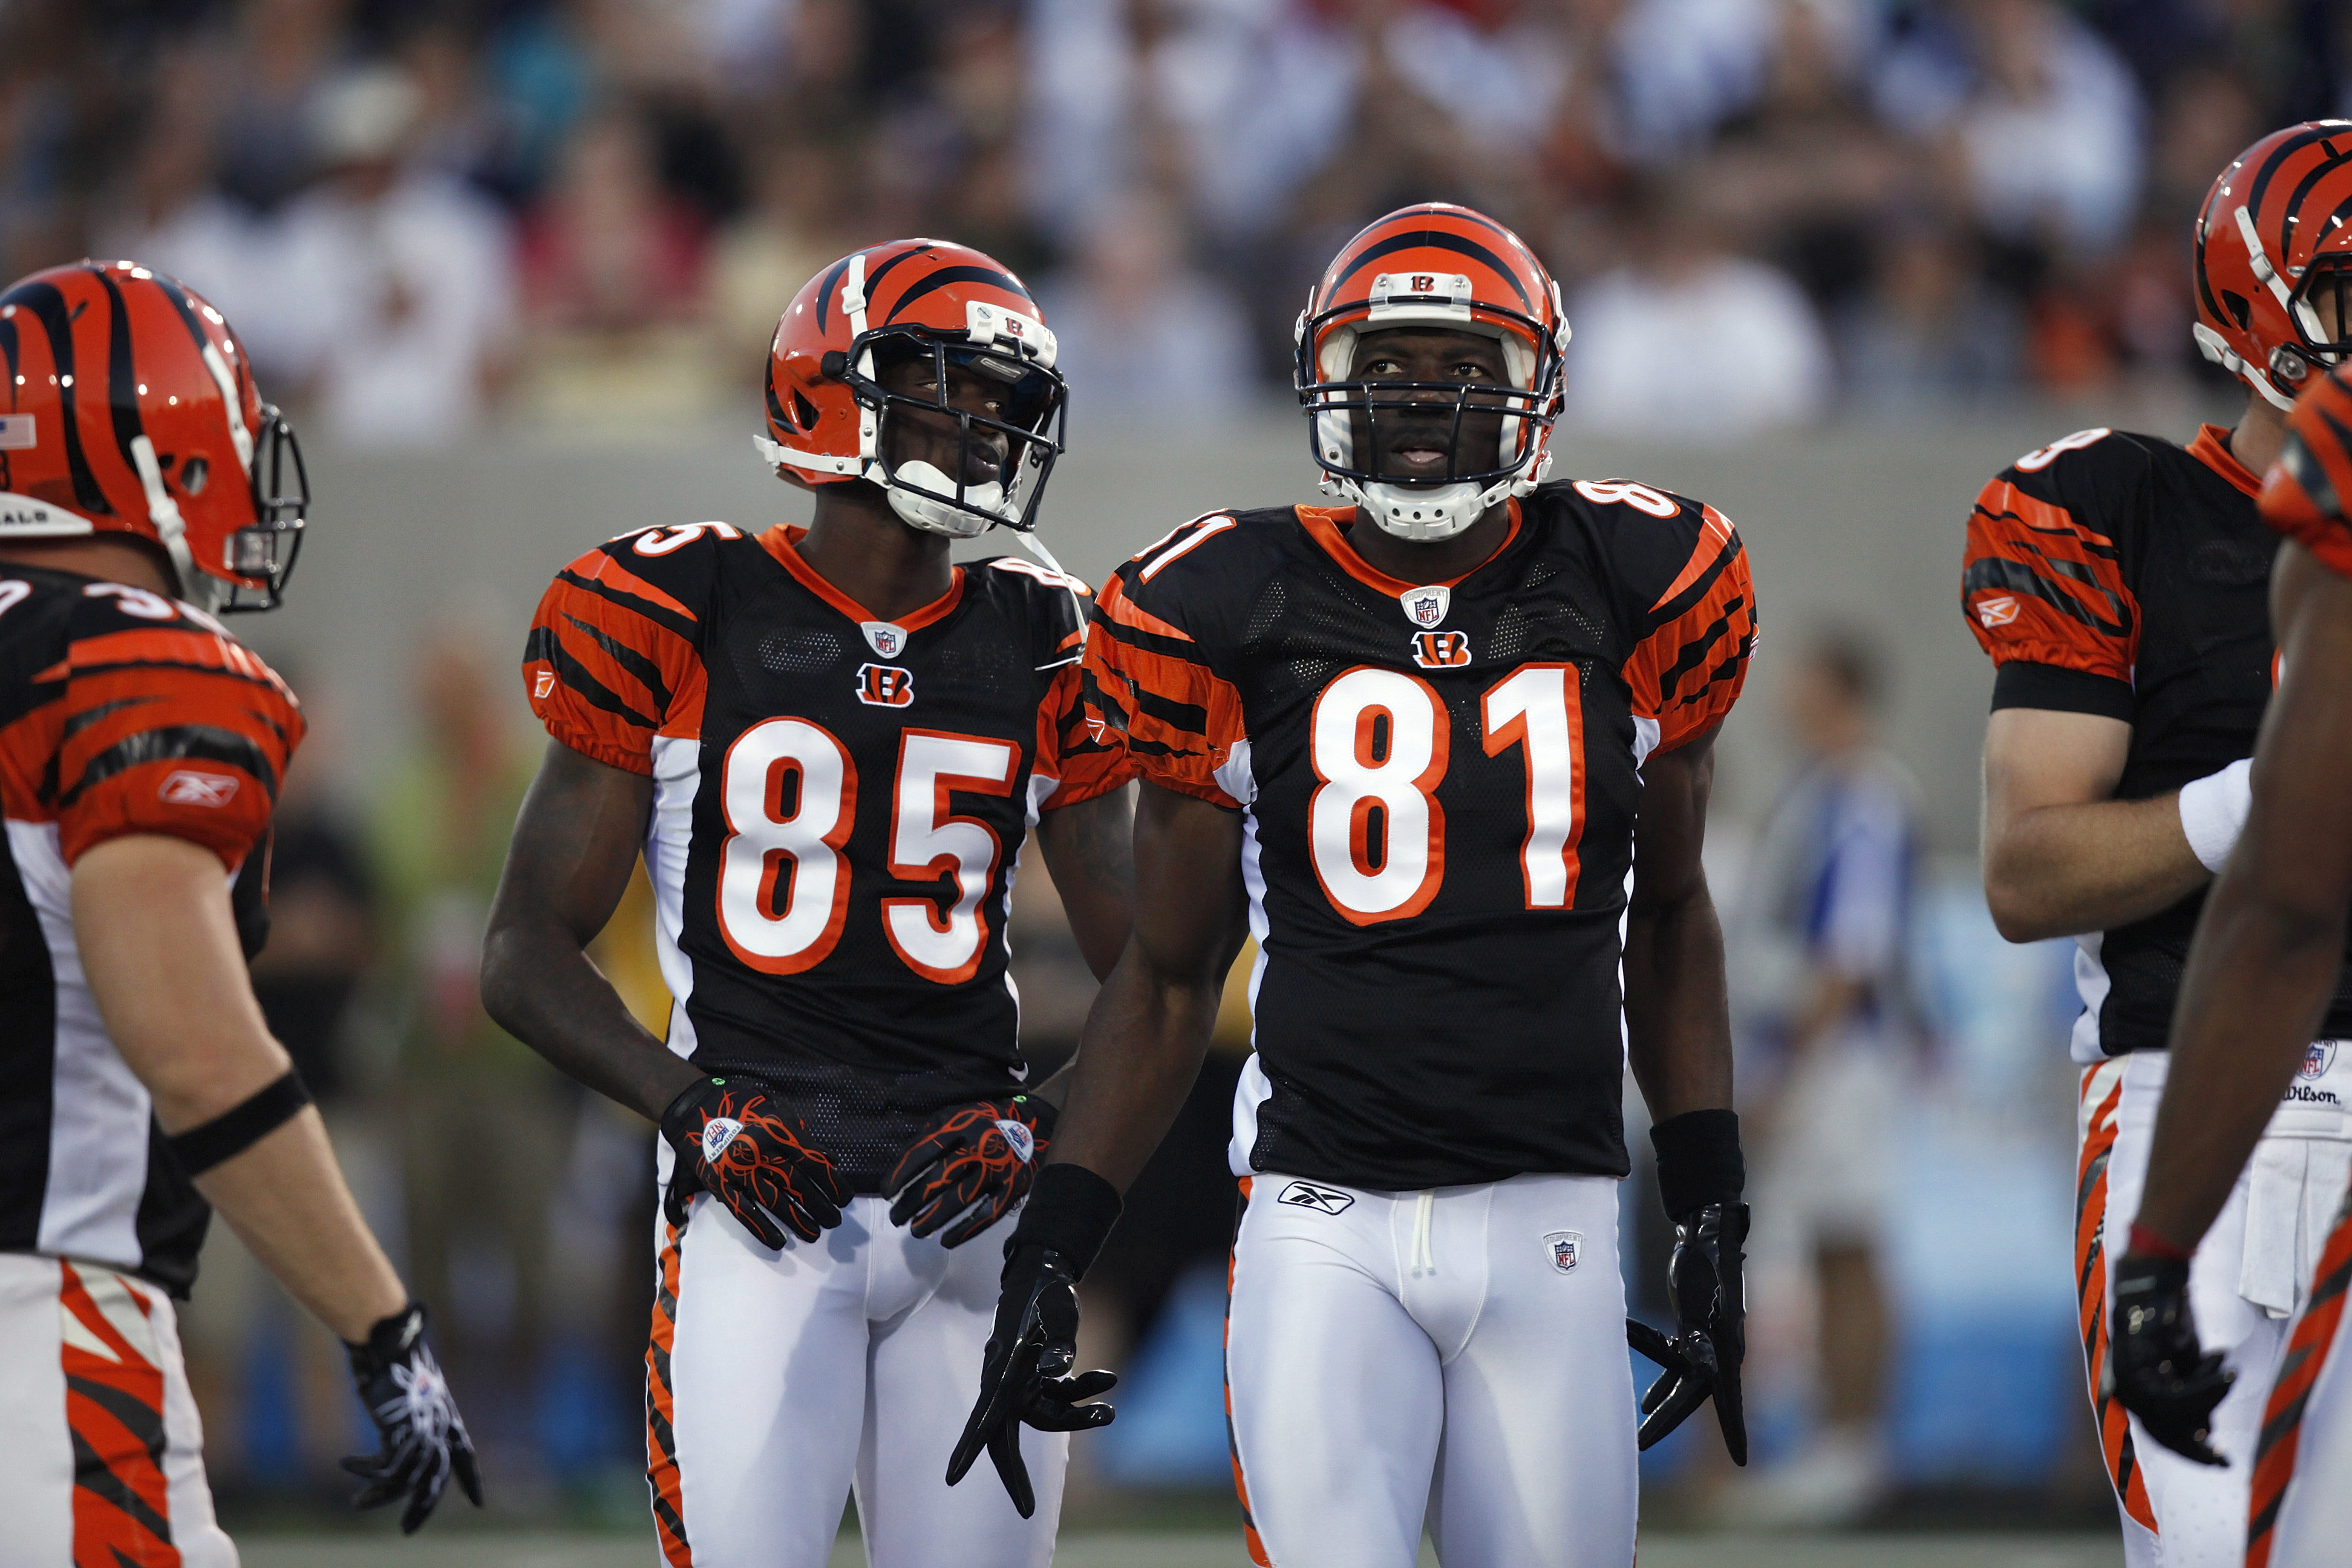 CANTON, OH - AUGUST 8: Terrell Owens #81 and Chad Ochocinco #85 of the Cincinnati Bengals look on against the Dallas Cowboys during the 2010 Pro Football Hall of Fame Game at the Pro Football Hall of Fame Field at Fawcett Stadium on August 8, 2010 in Cant